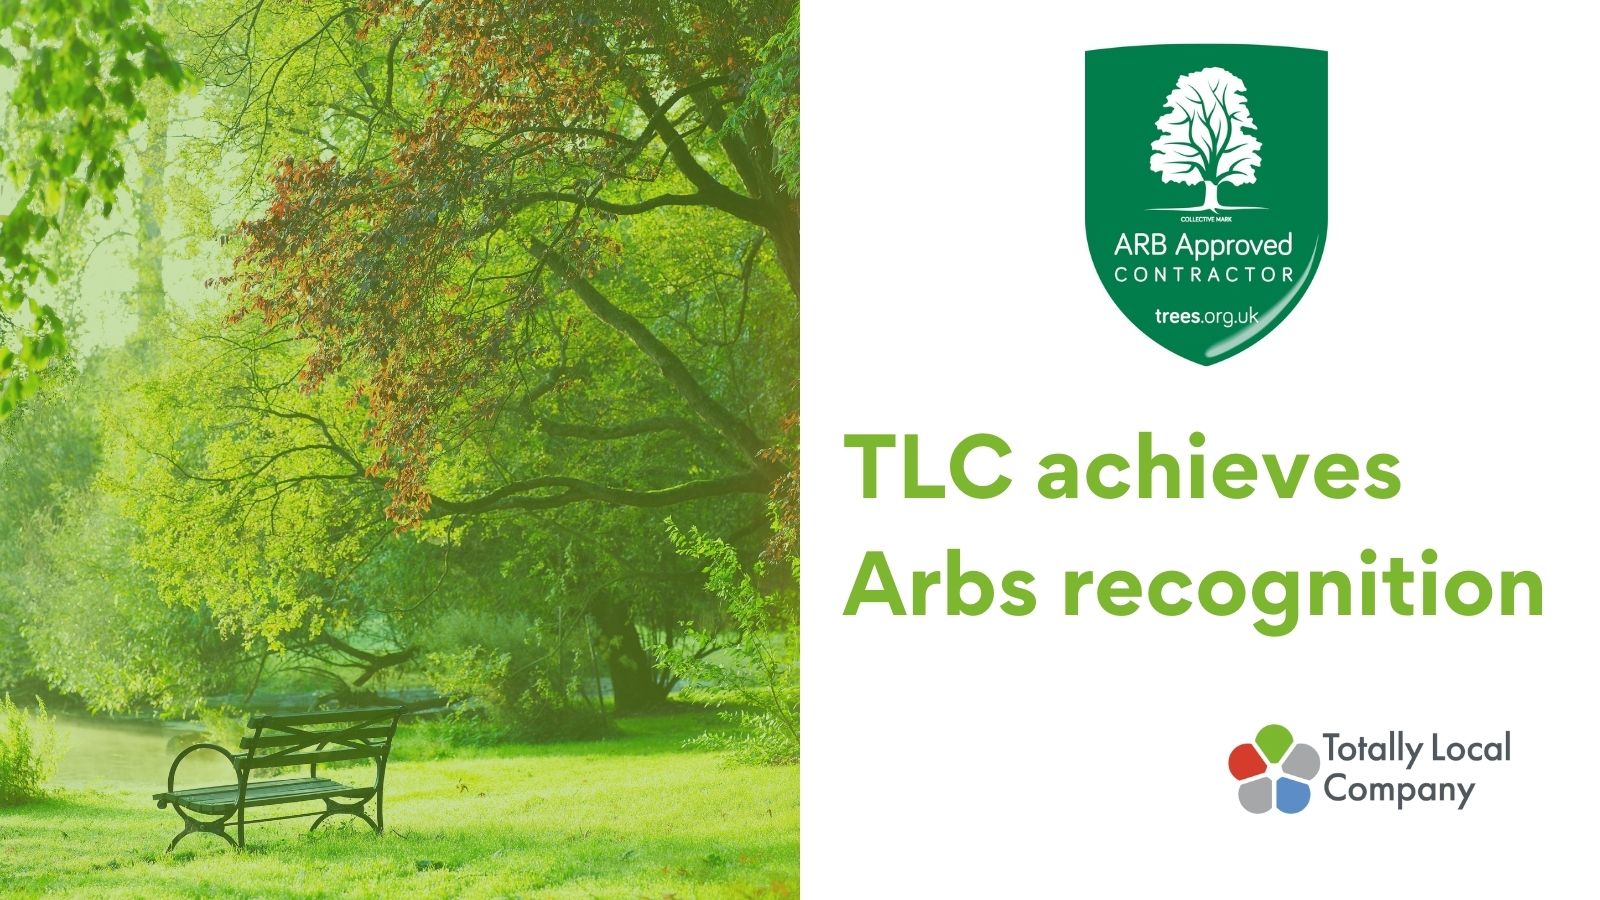 picture of trees and the Arboricultural Association logo along with wording TLC achieves Arbs recognition